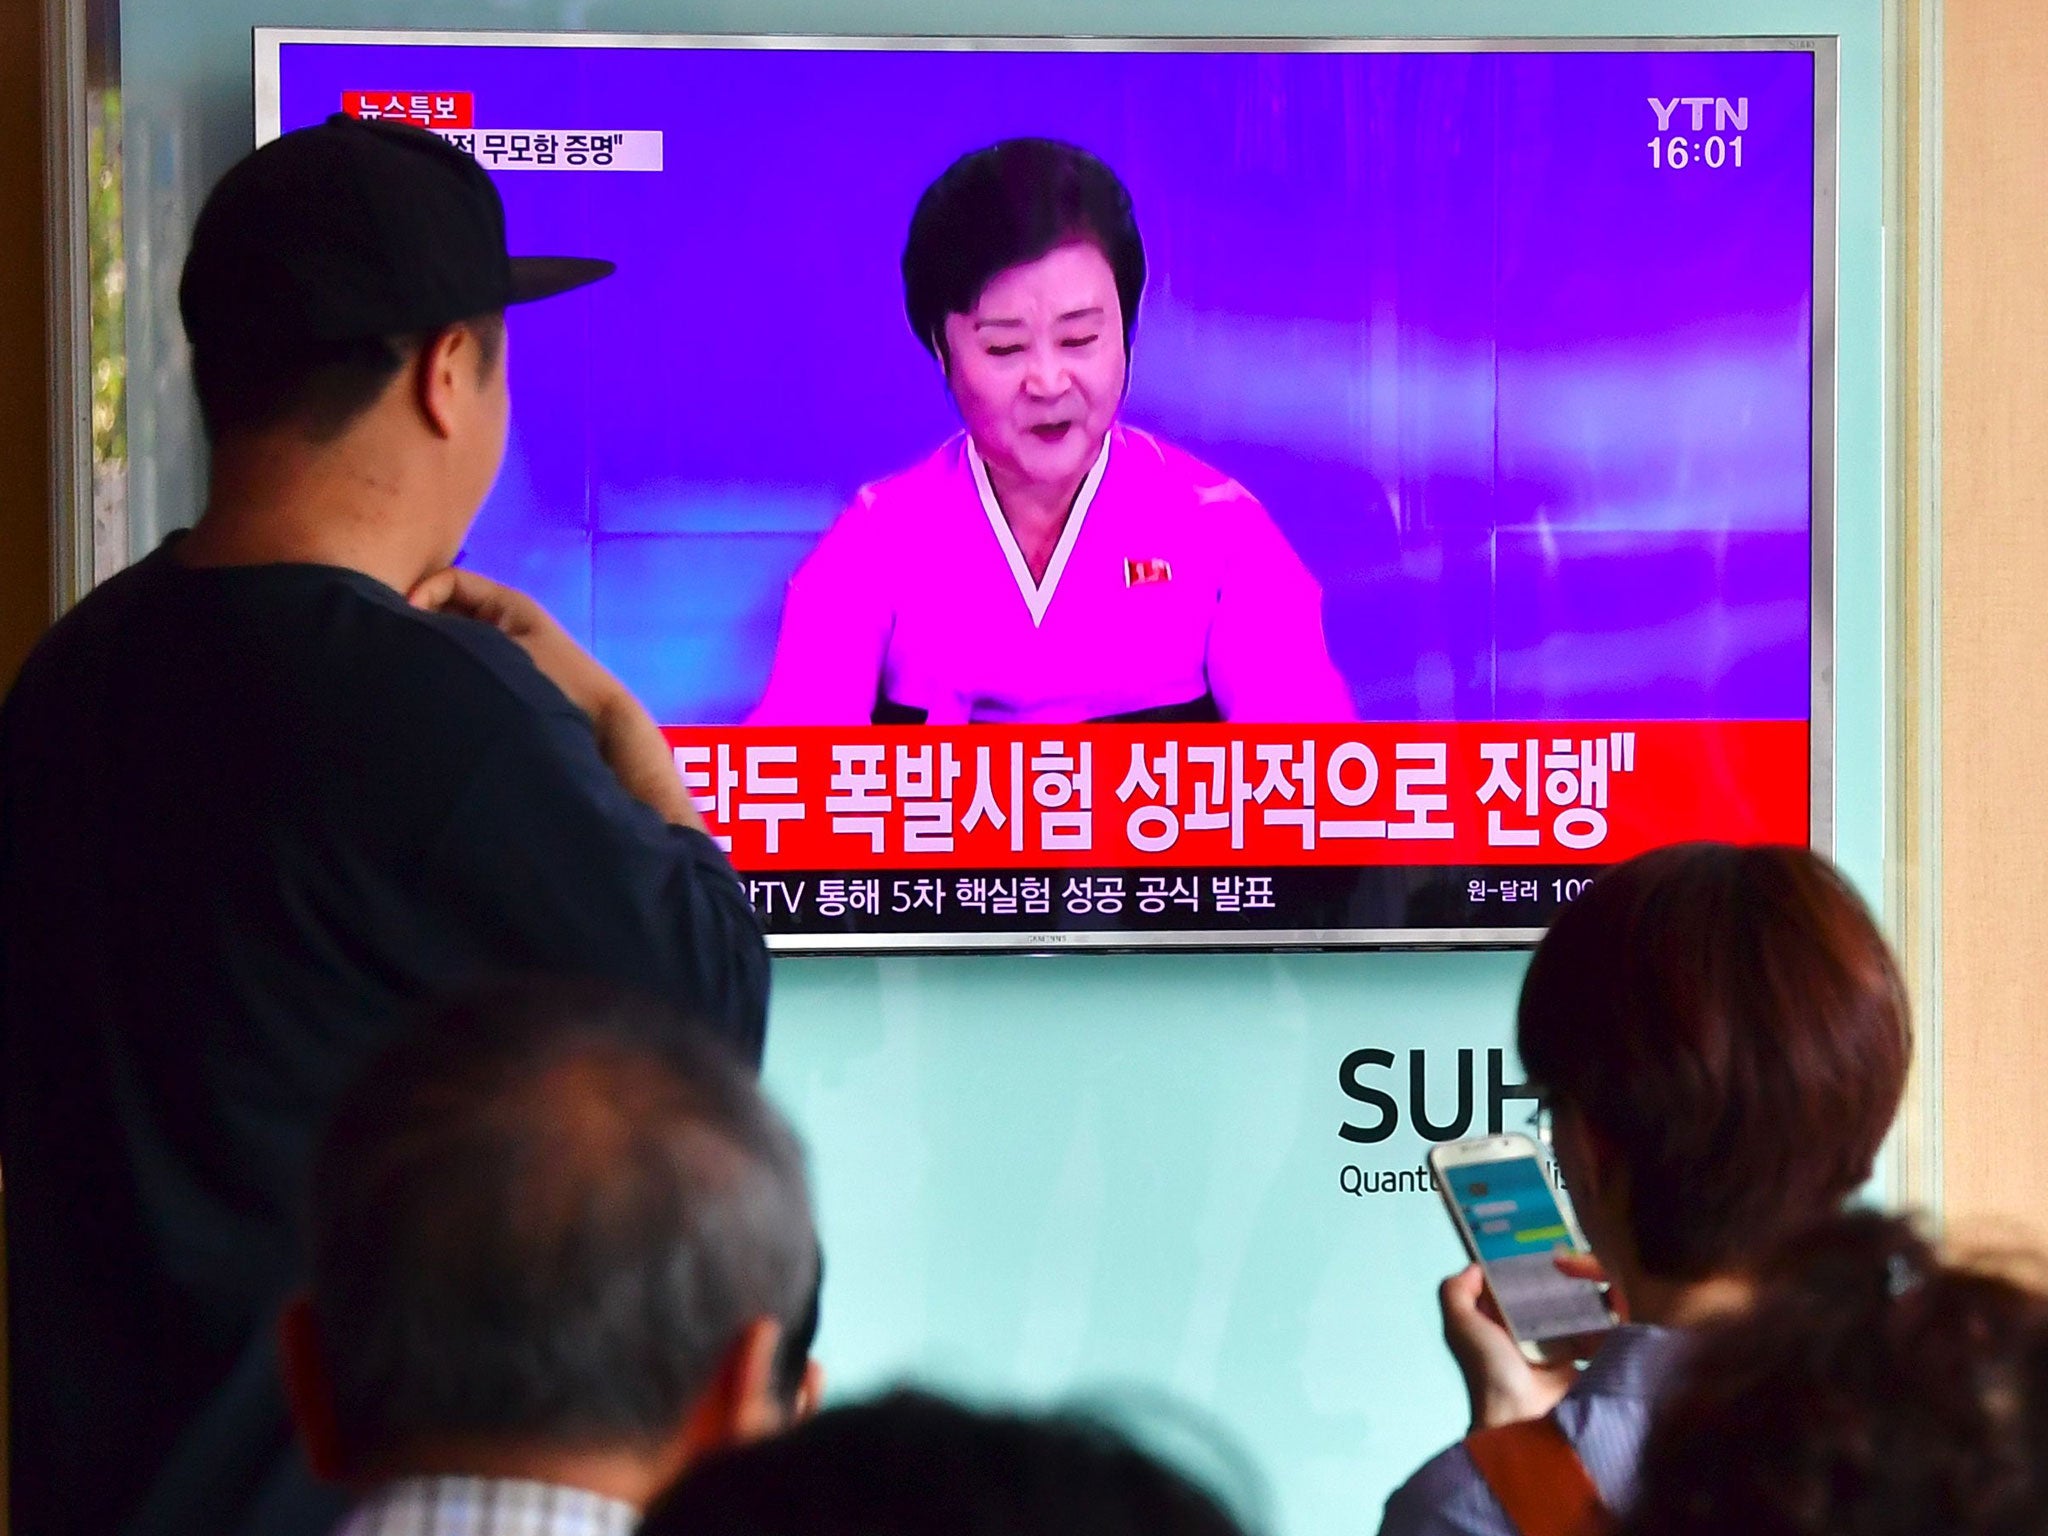 People watch a television news broadcast showing a North Korean anchor announcing the country's latest nuclear test, at a railway station in Seoul on September 9, 2016.